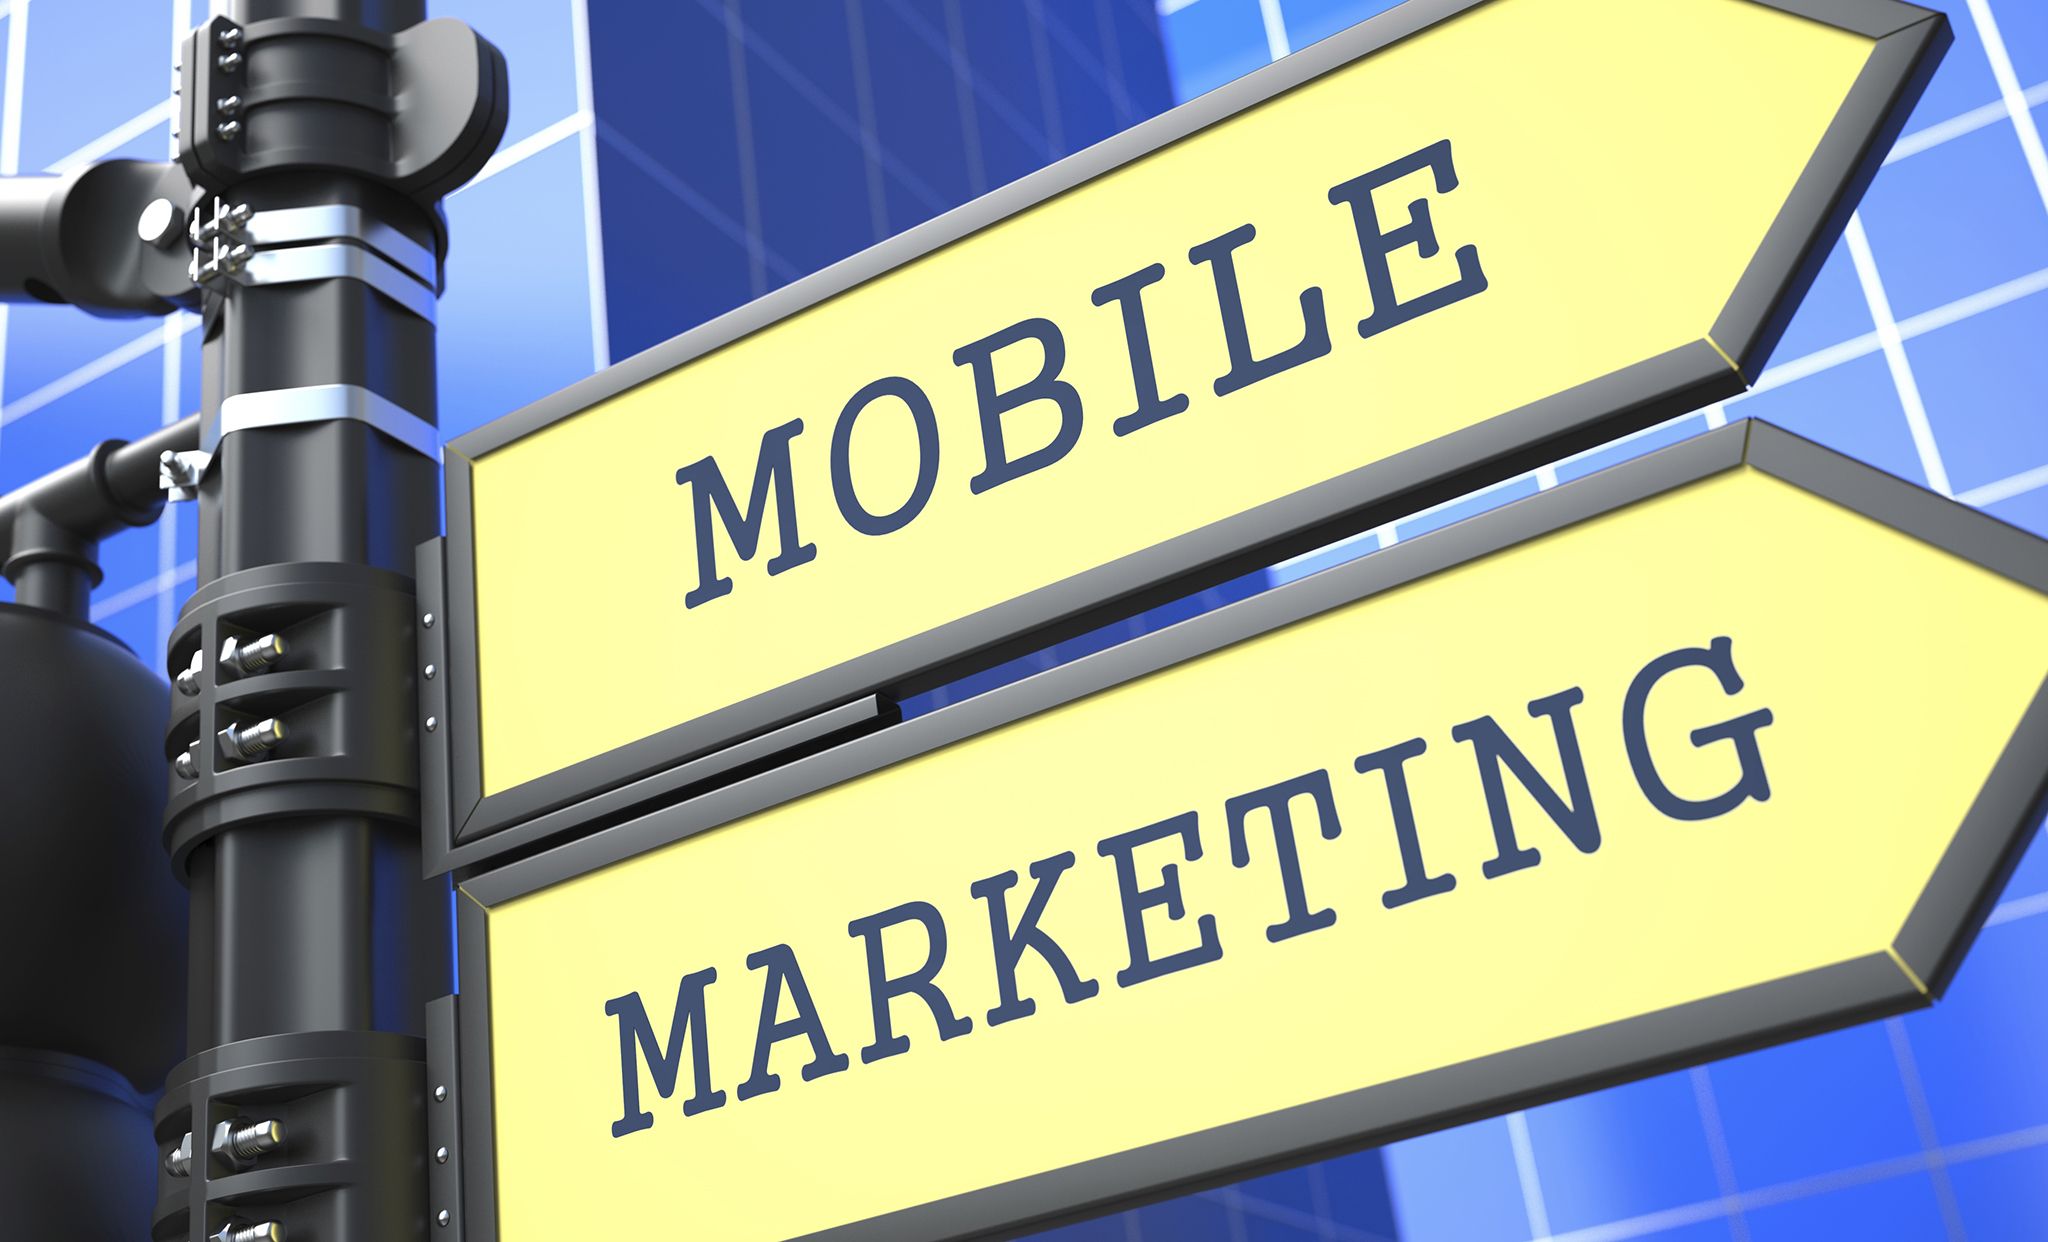 Mobile Marketing - Our Company is the best in Mobile Marketing Services.